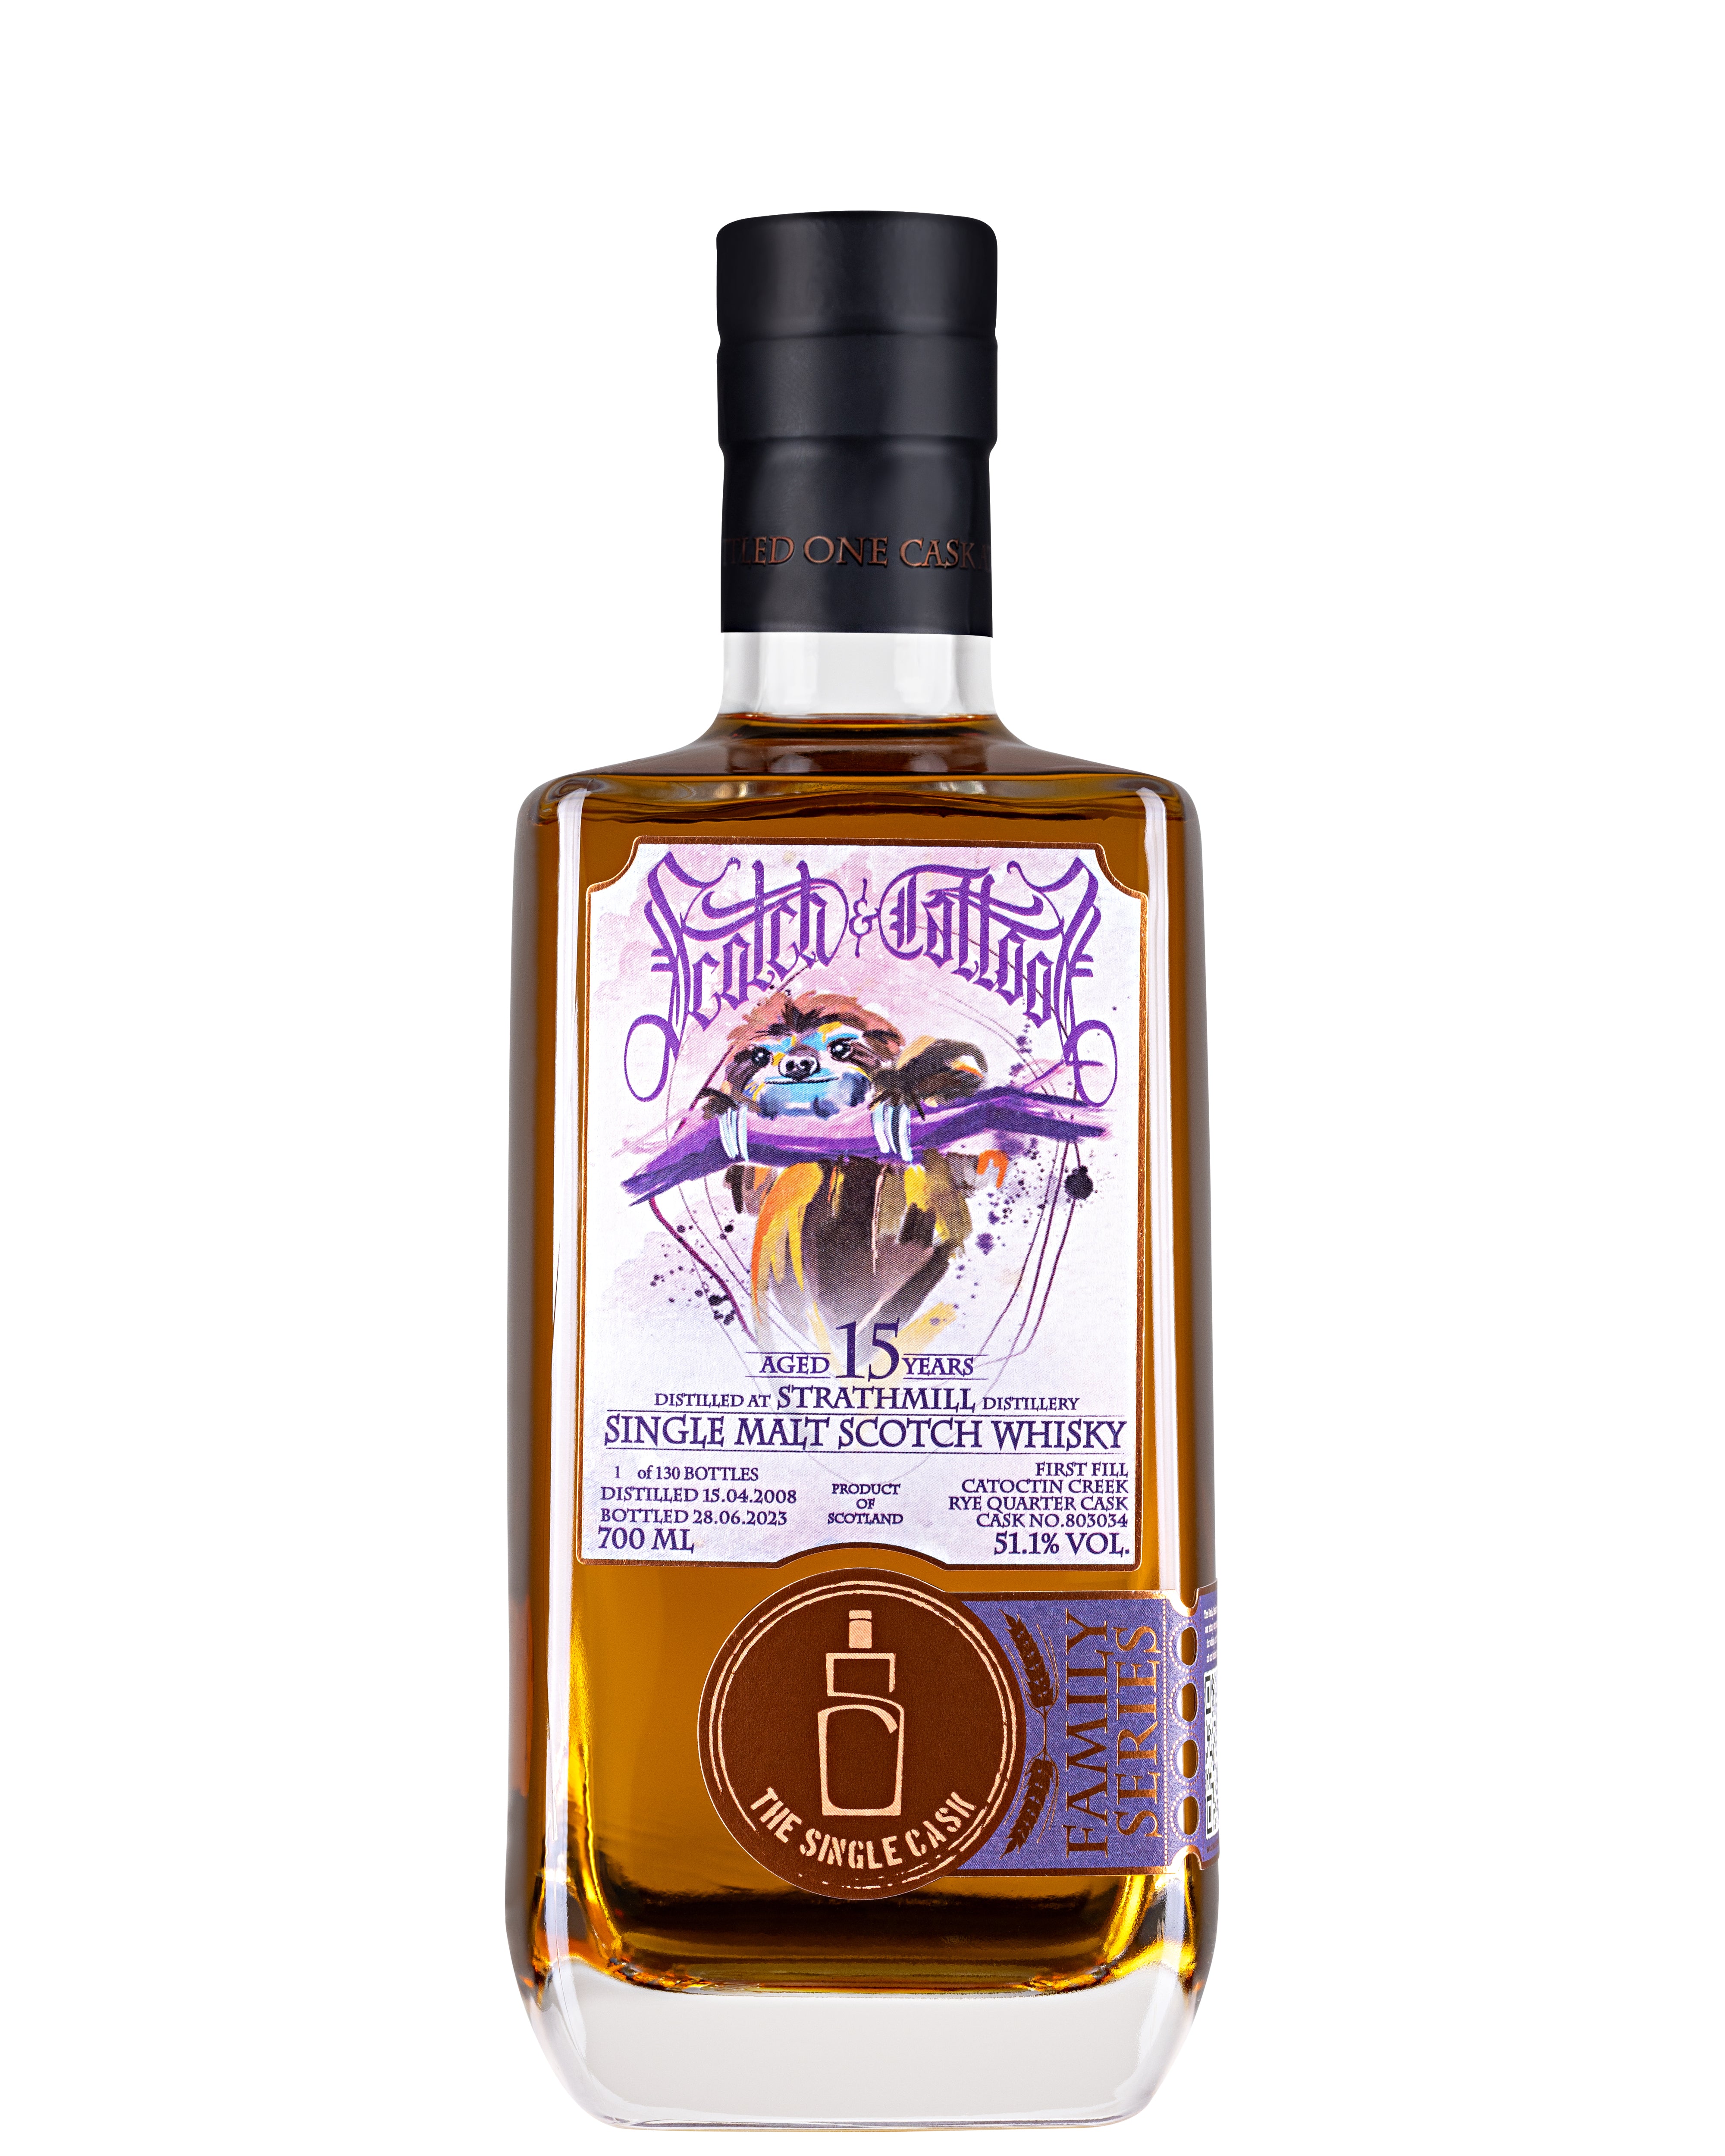 Strathmill 15 years old whisky (cask 803034)